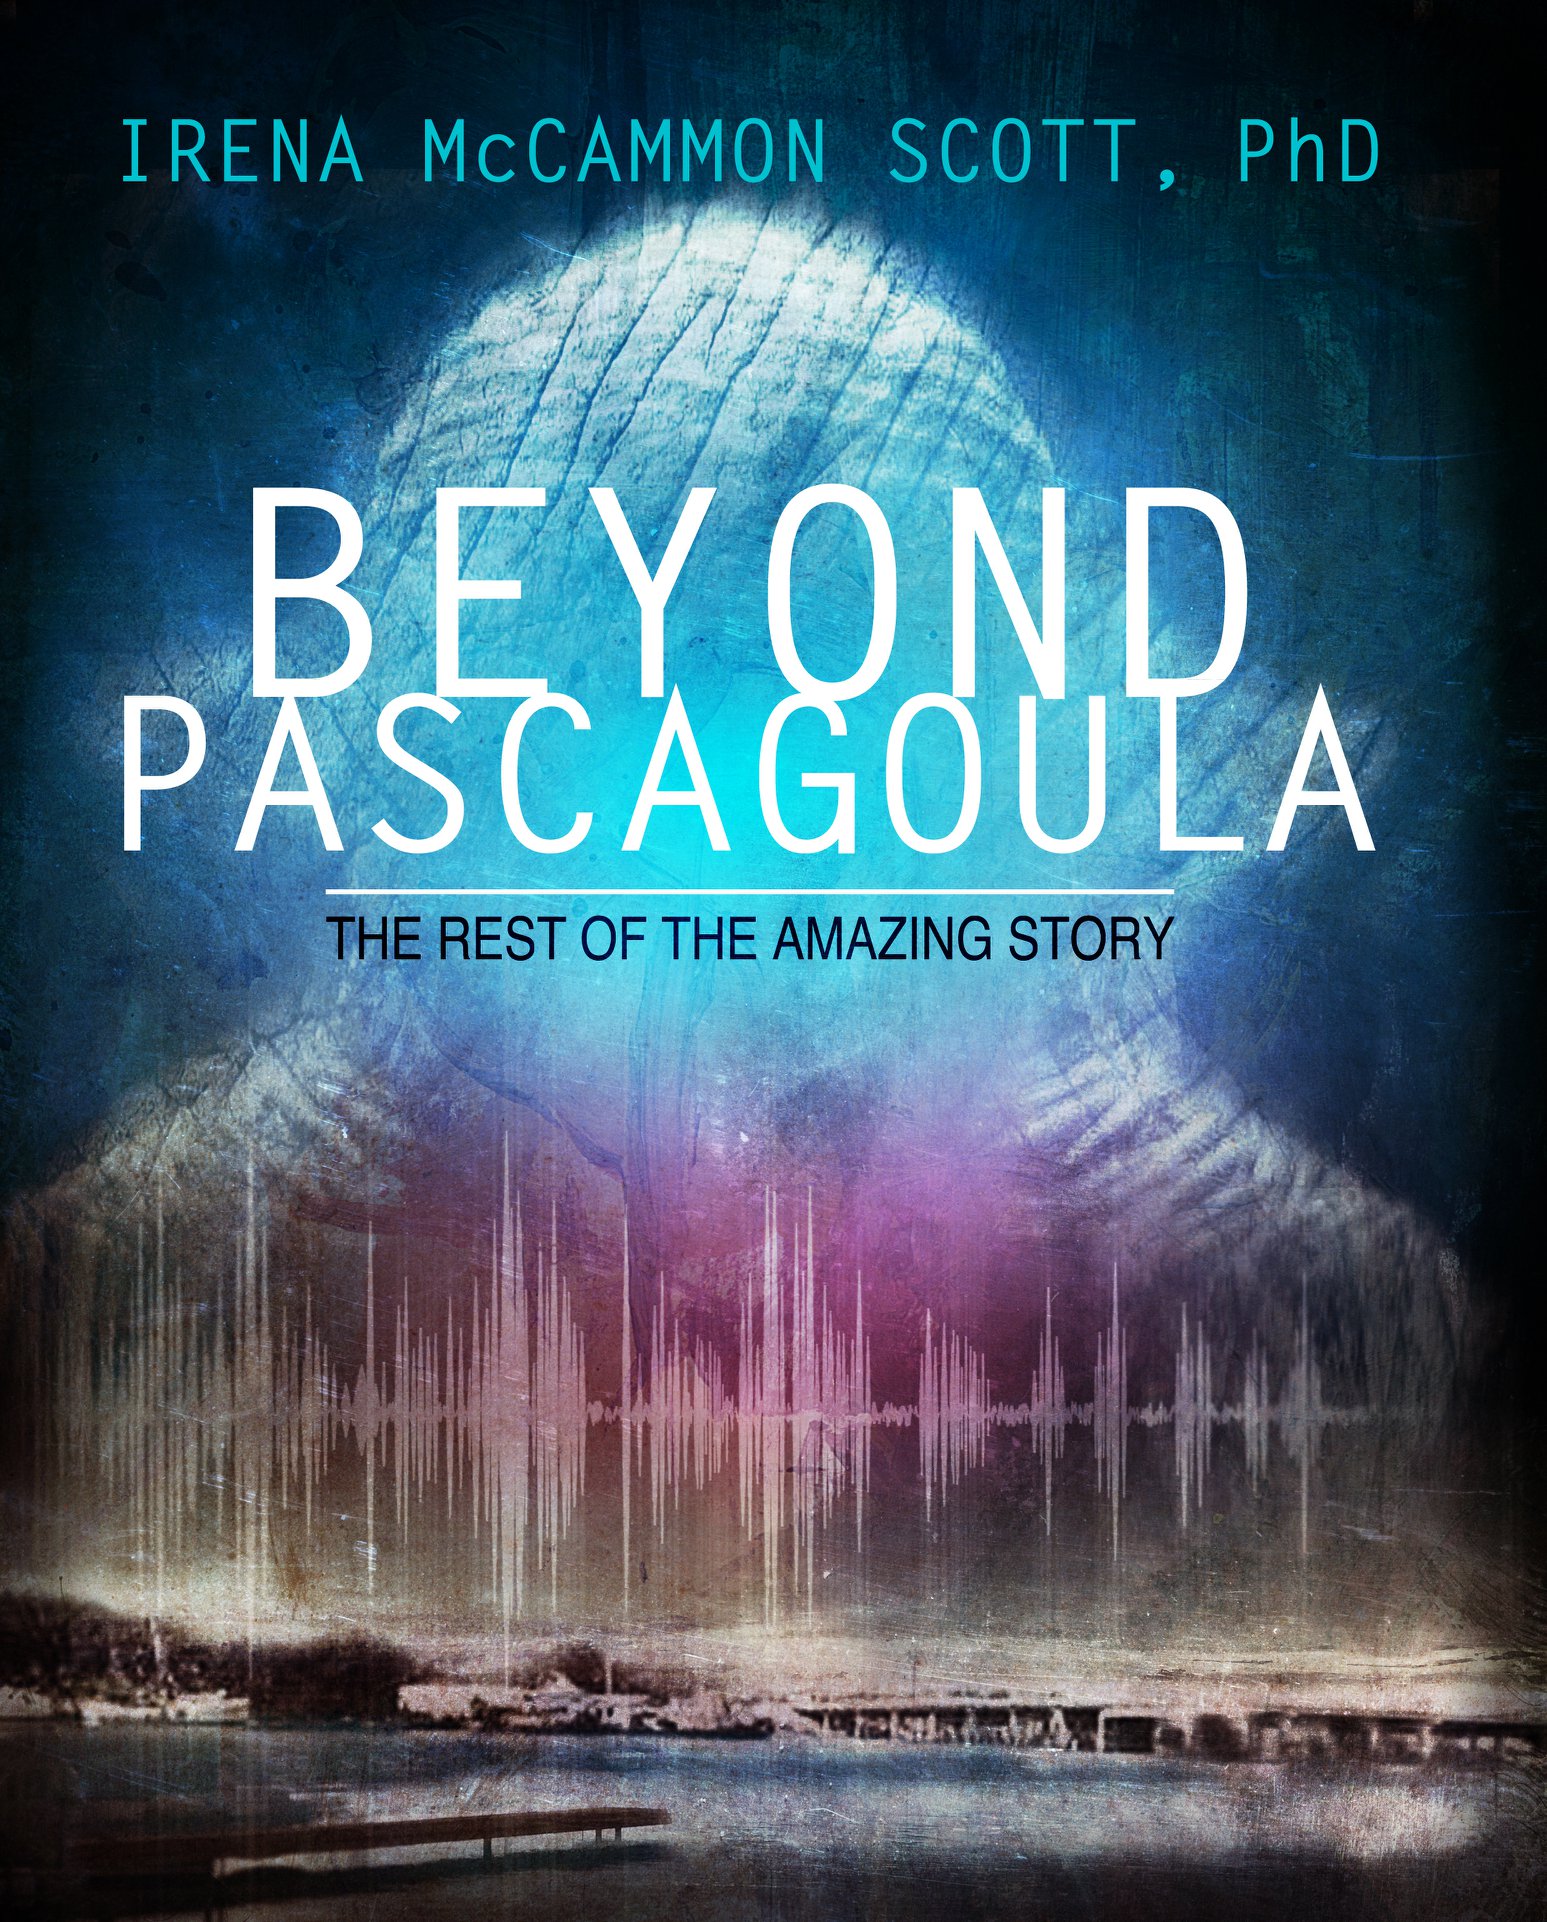 Beyond Pascagoula - The Rest of The Amazing Story Coming in 2021